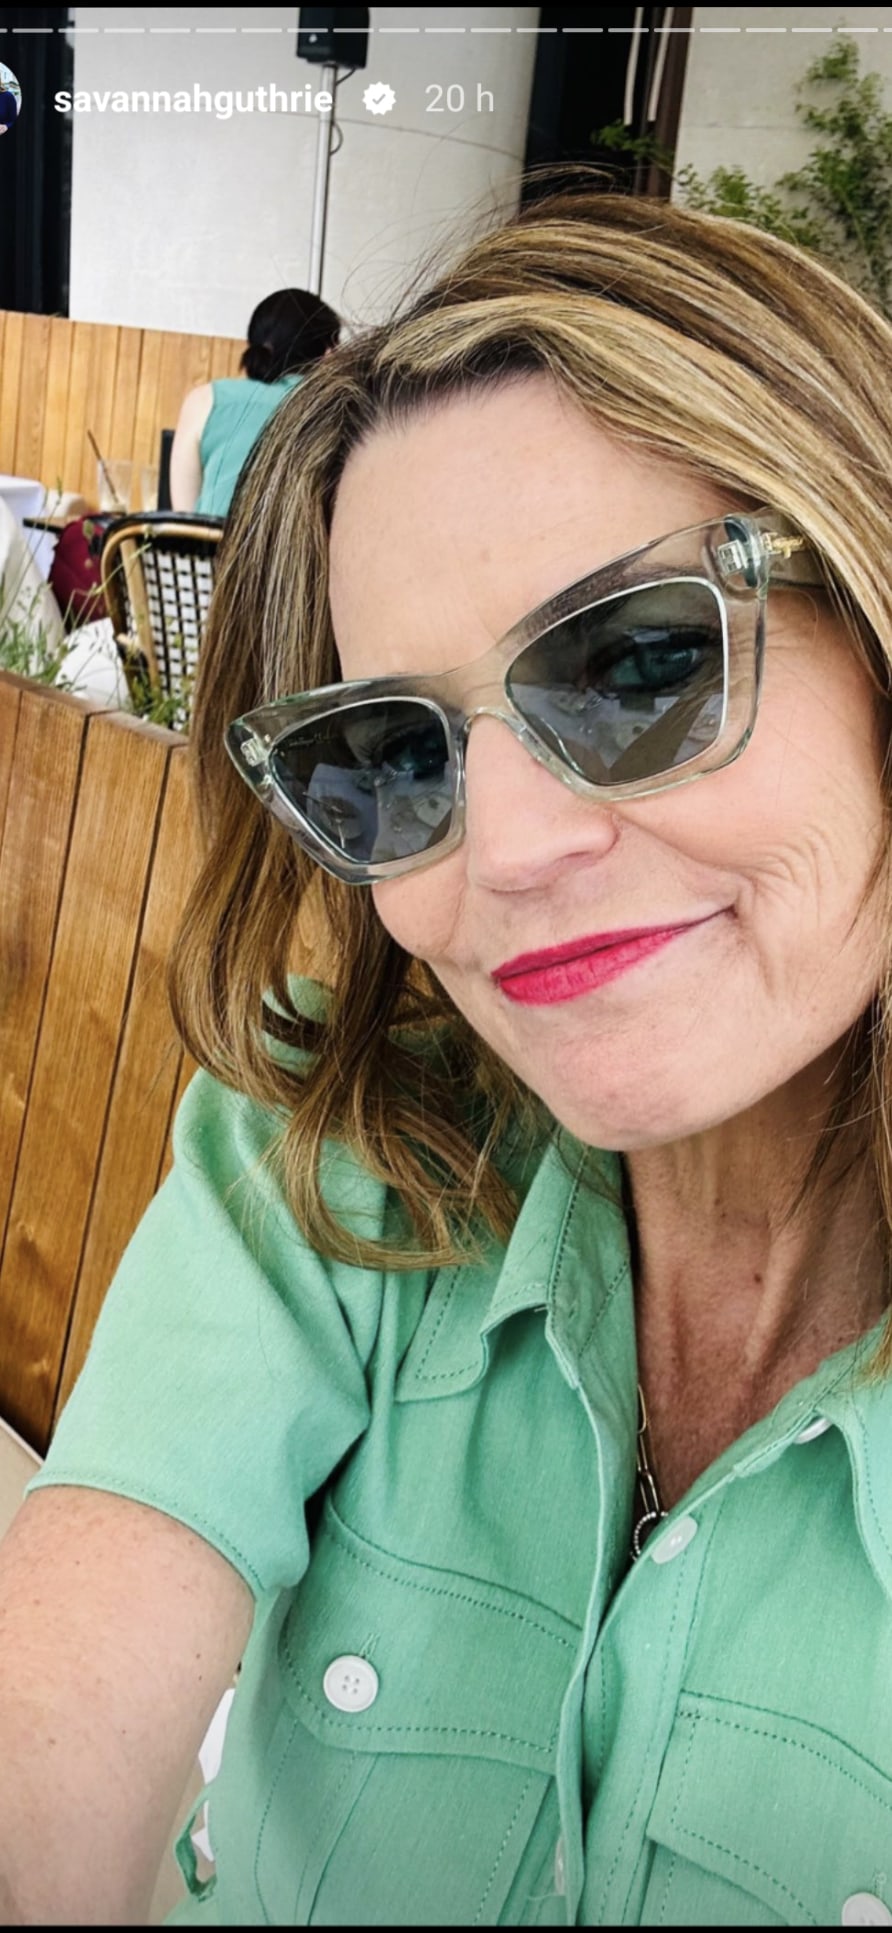 Savannah Guthrie looked fabulous as she enjoyed some time in the sun in Paris